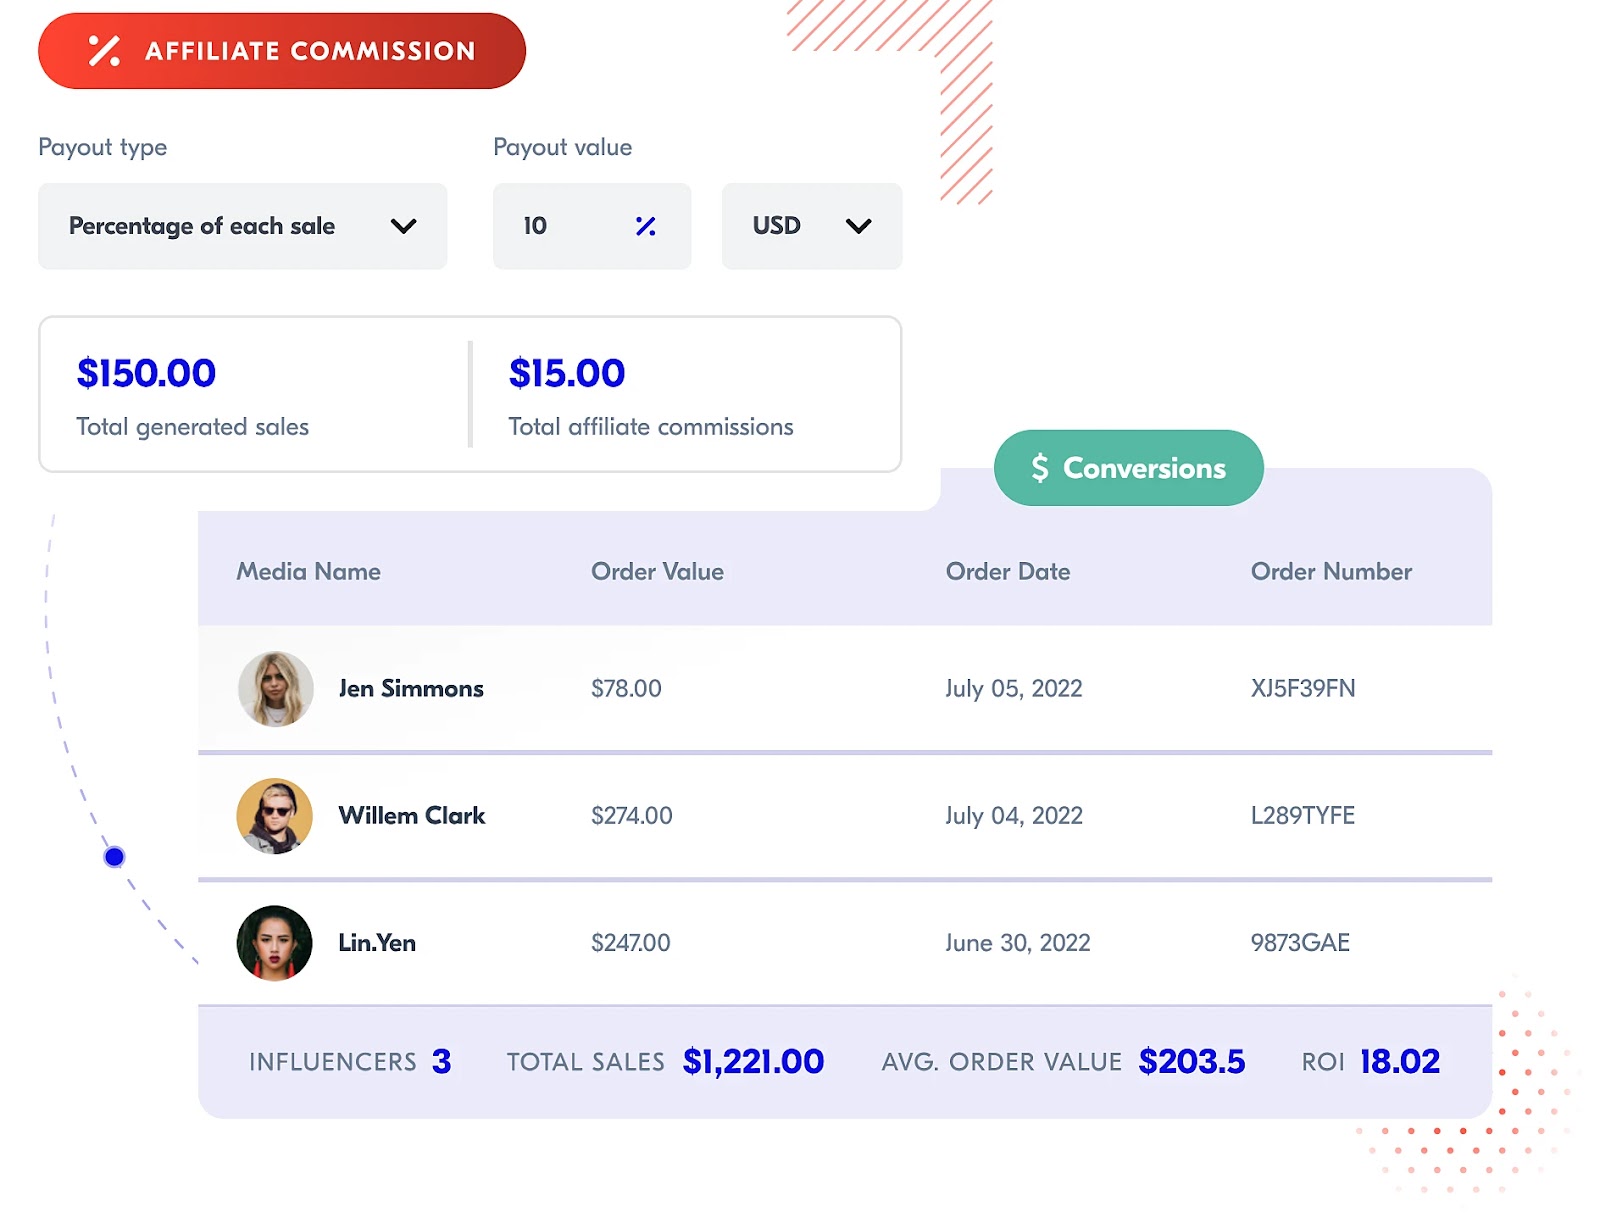 Upfluence's dashboard showing influencers, conversions, roi and other data